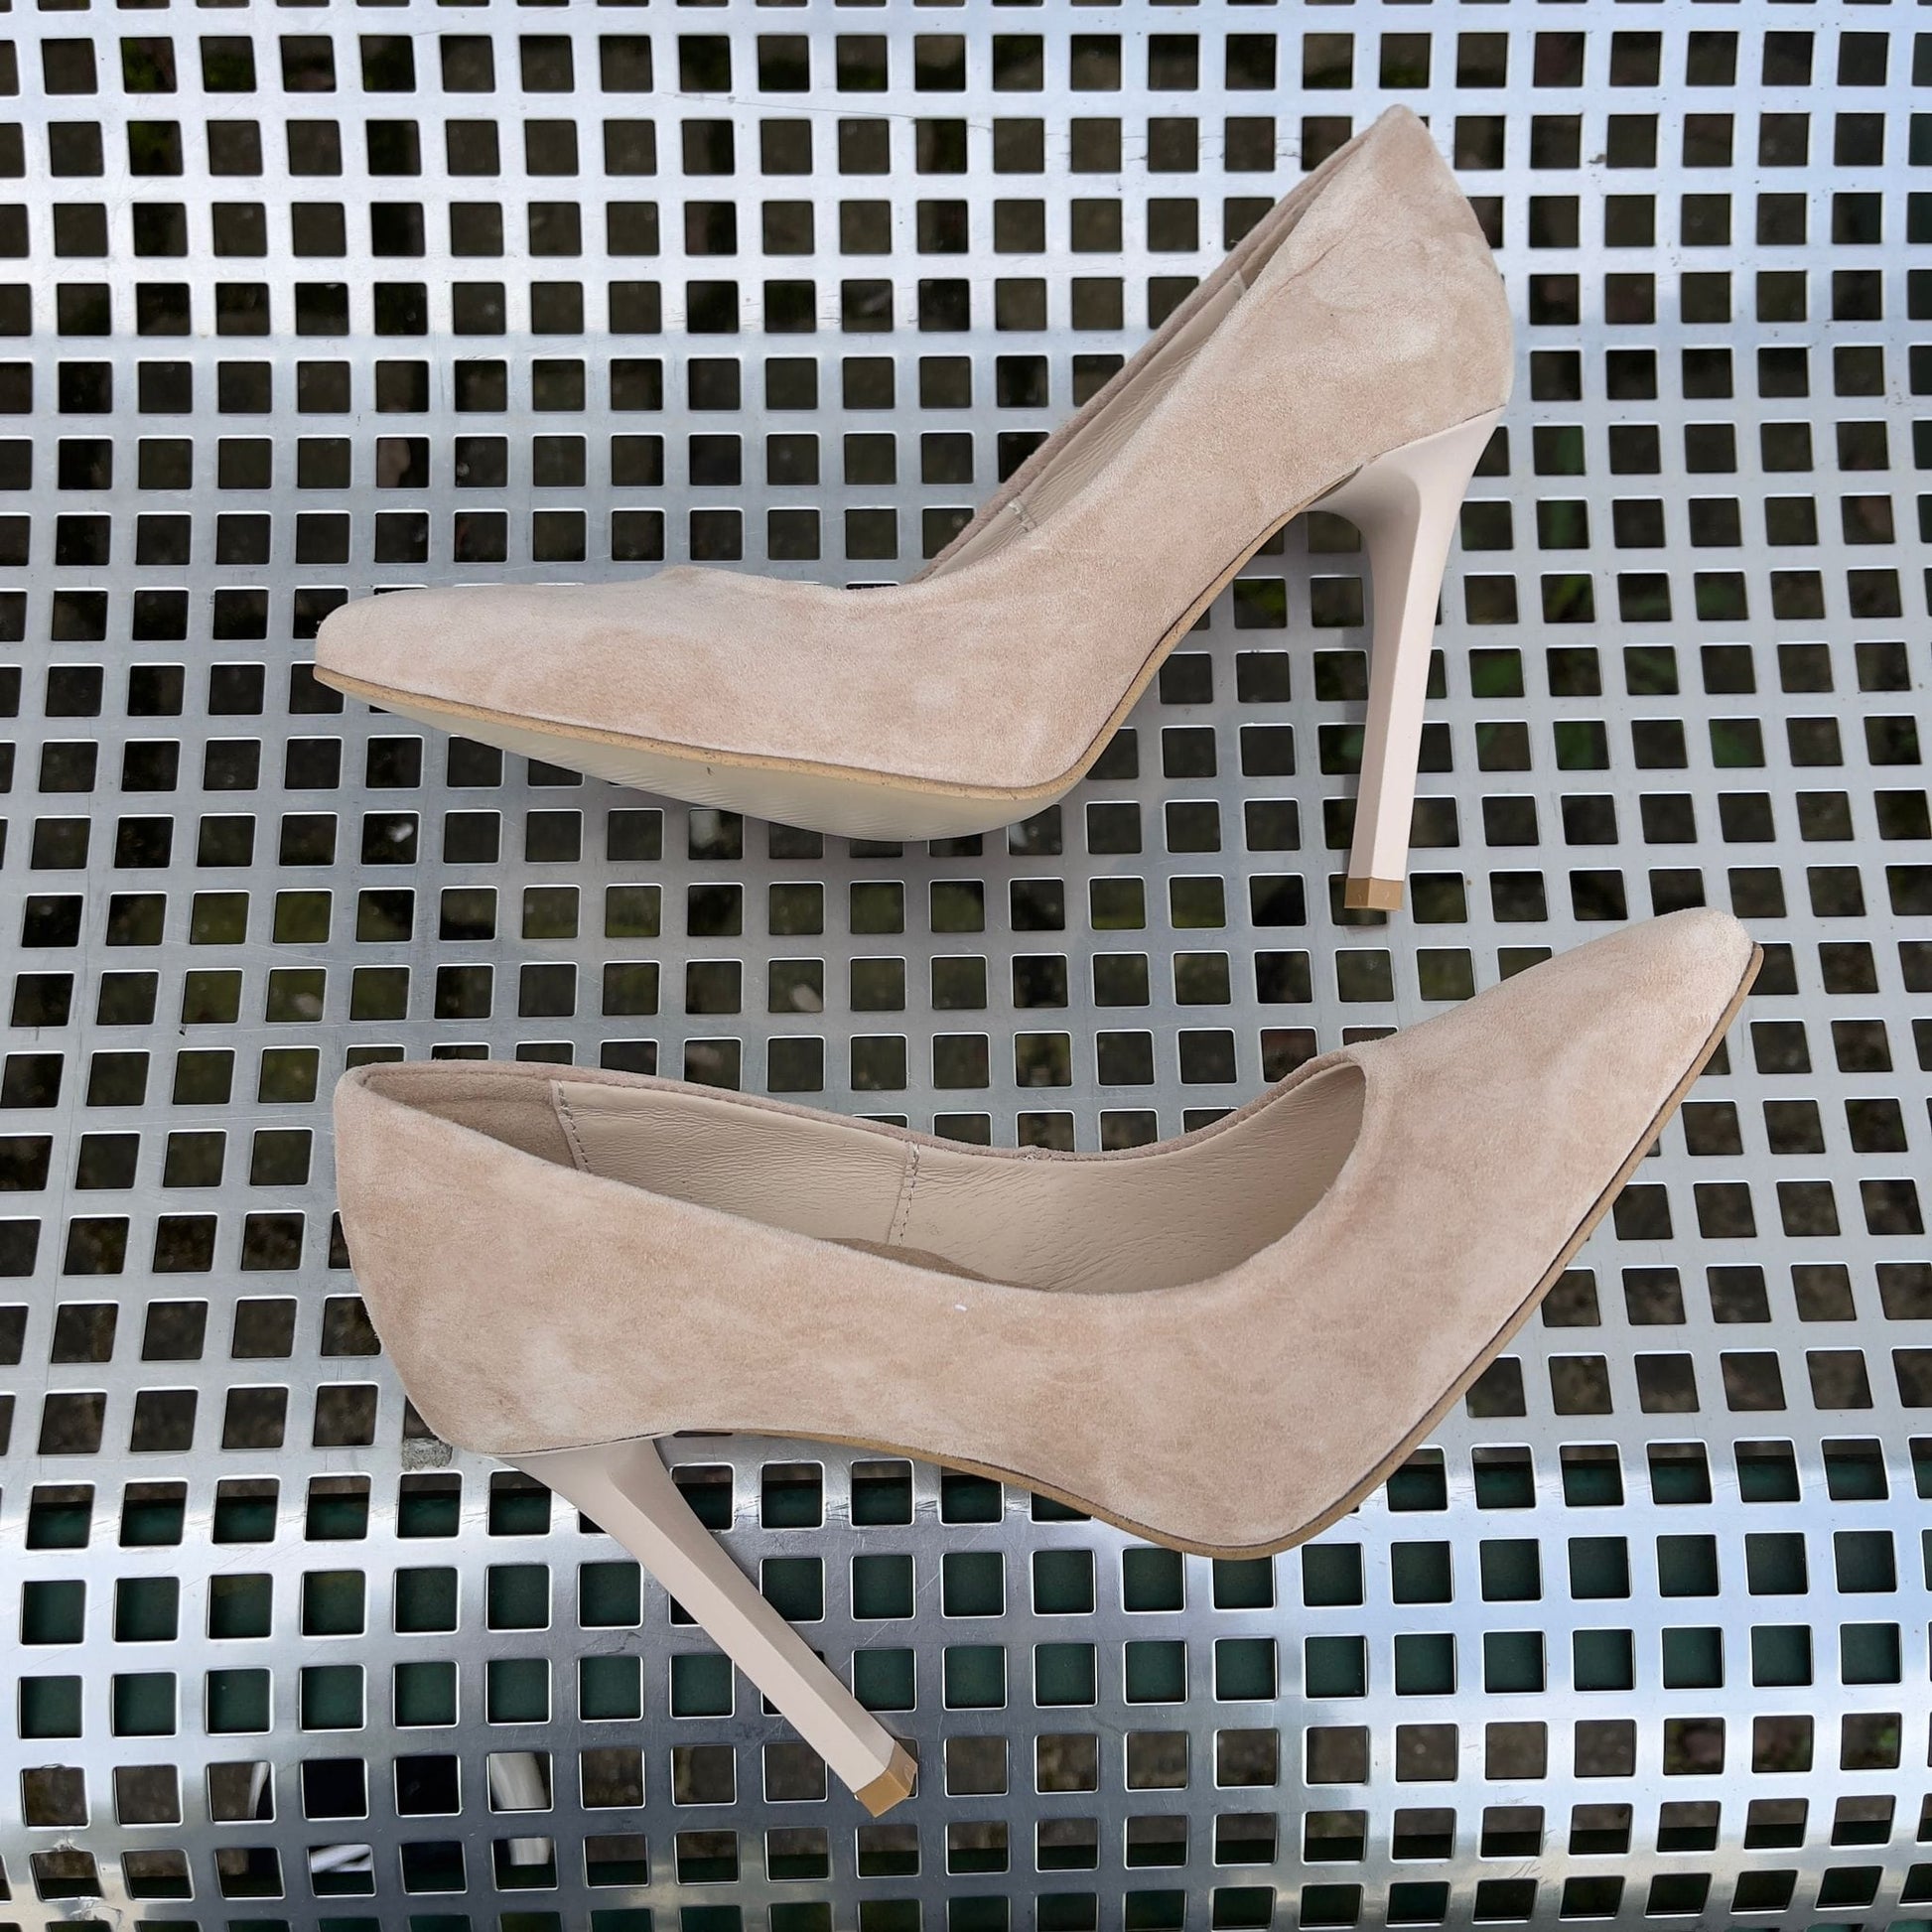 Pointed toe nude suede court heels